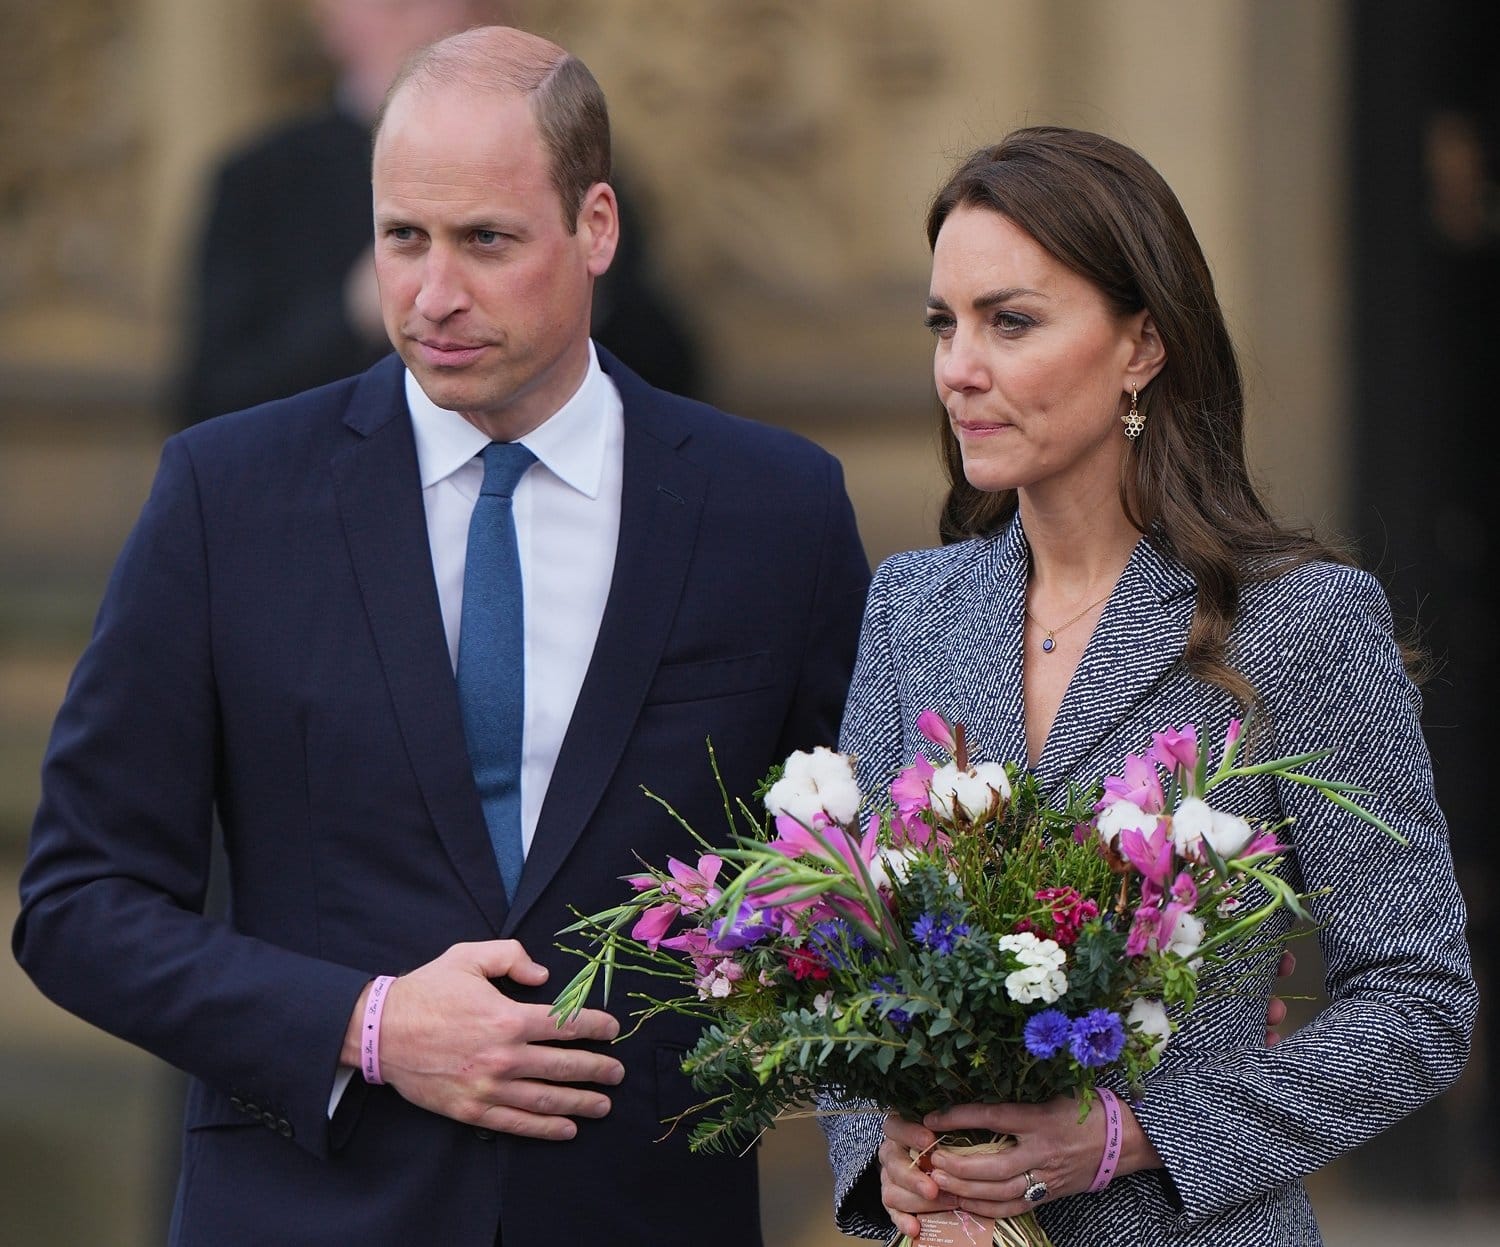 Prince William, Duke of Cambridge, and Catherine, Duchess Of Cambridge (aka Kate Middleton) honored the 22 people whose lives were taken and the victims who were left injured or affected by the Islamist terrorist attack at Manchester Arena